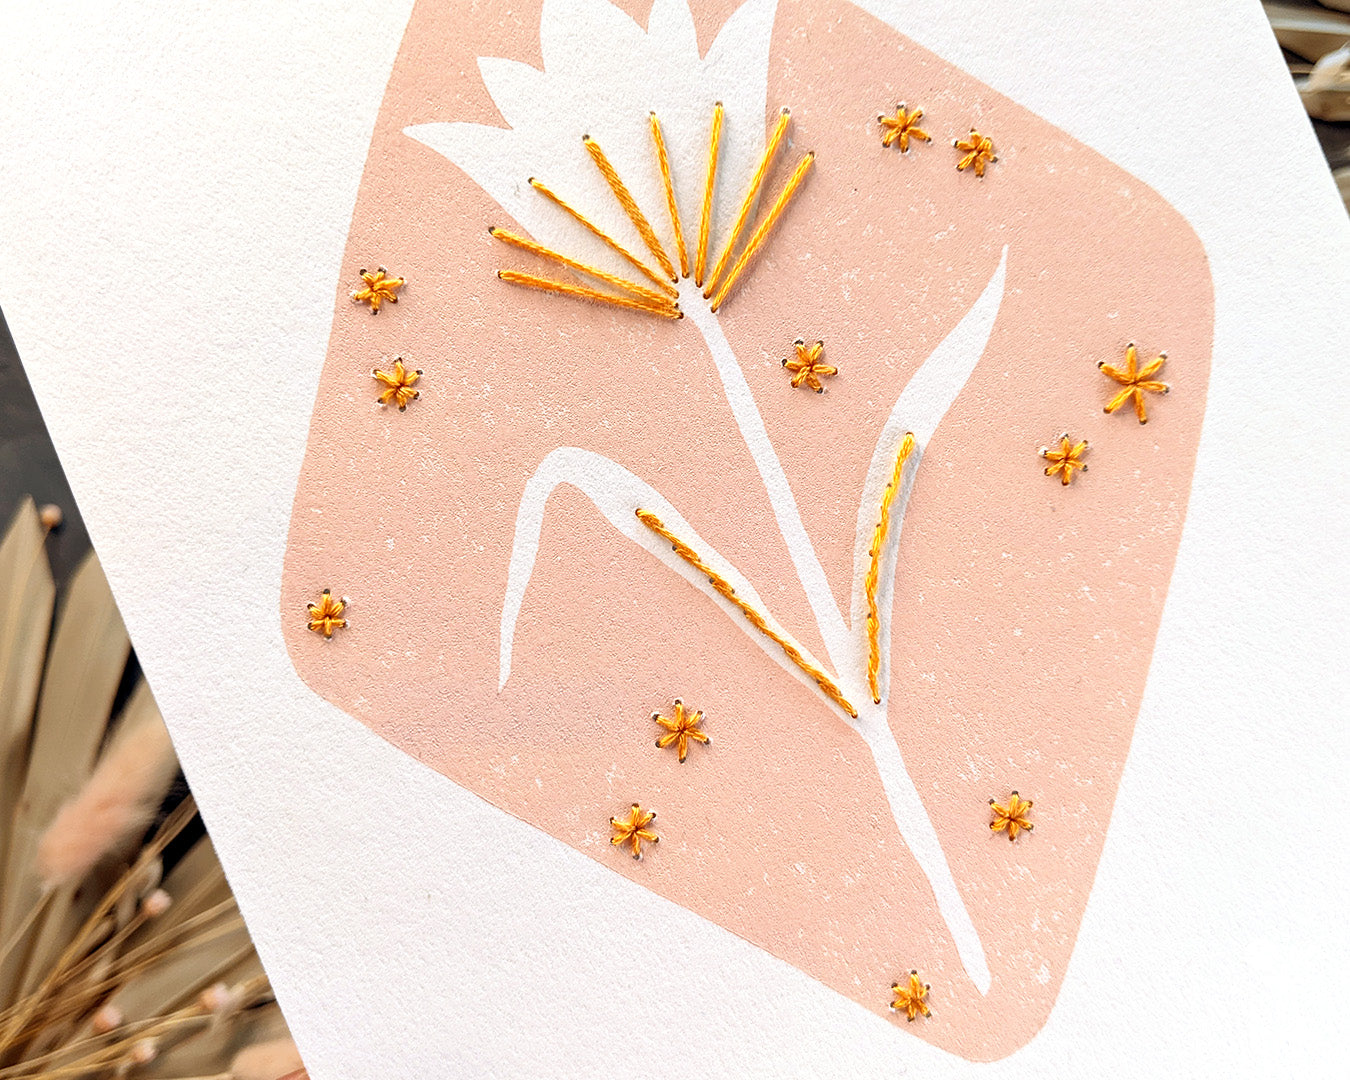 Handmade linocut embroidered print. Pink peachy flower print printed with oil based ink and finished with embroidery floss. Super Seconds Festival sale. Discounted print 40% off. Art by Booba Prints.